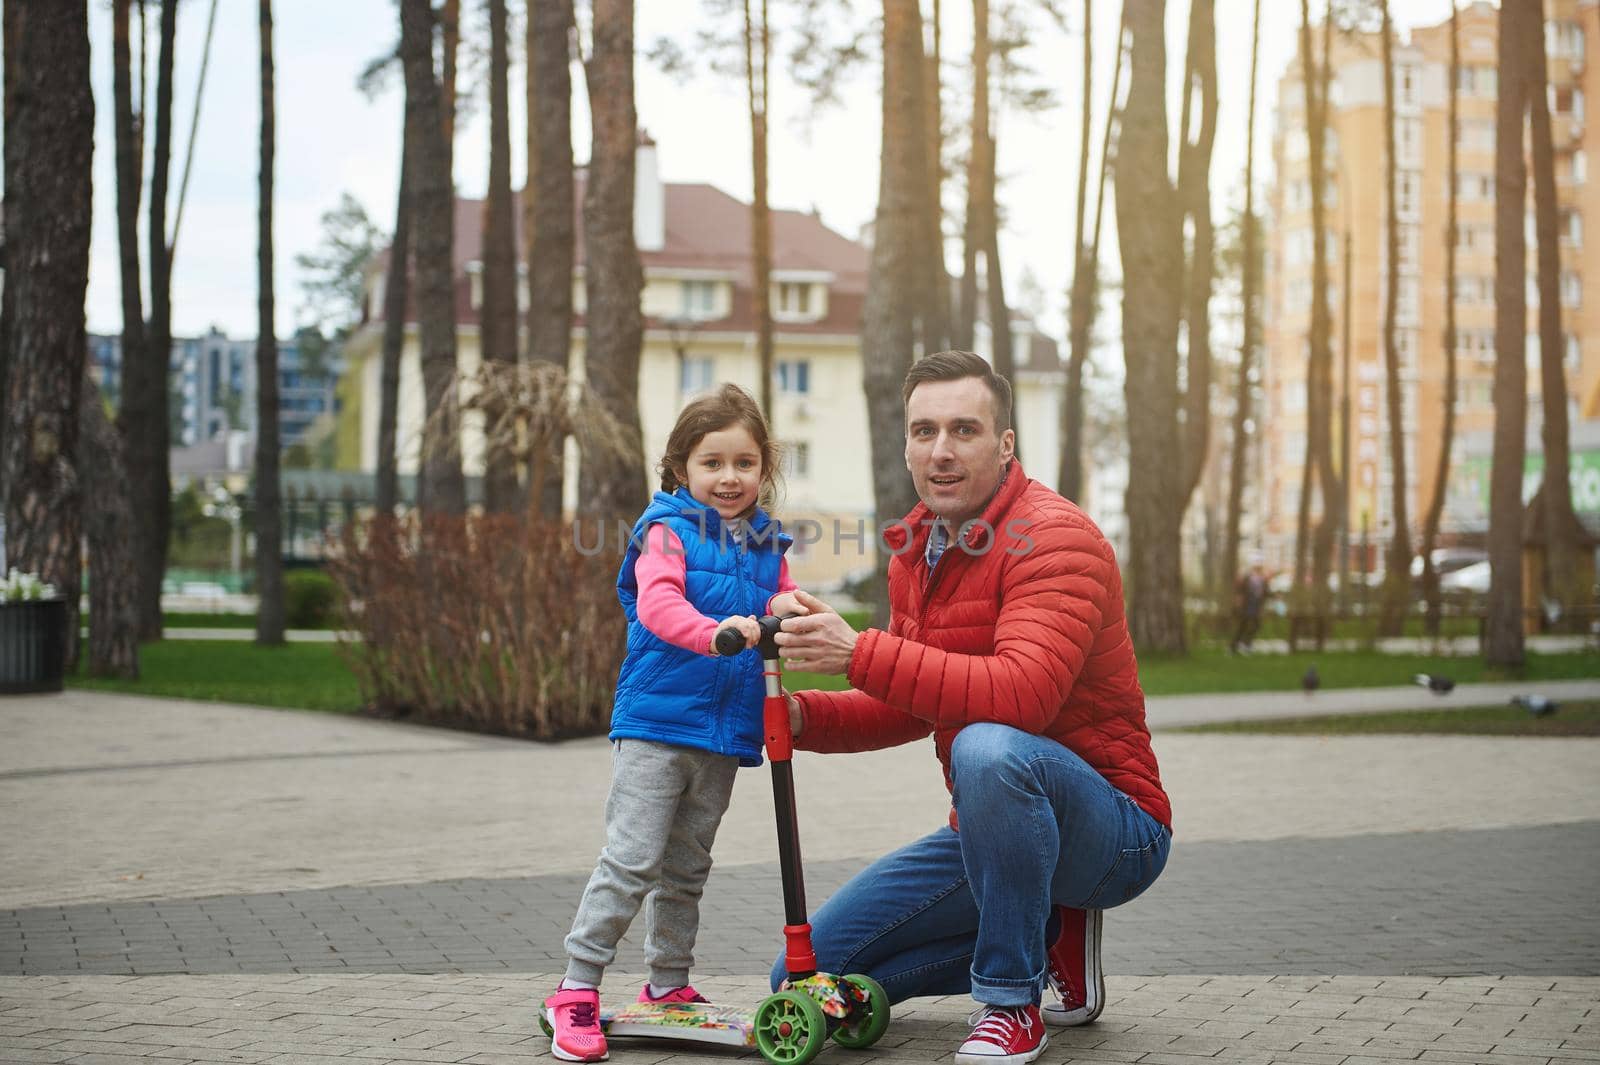 Handsome middle aged Caucasian man, happy caring father and his beloved daughter - adorable baby girl on a kick scooter, spending time together in an urban park